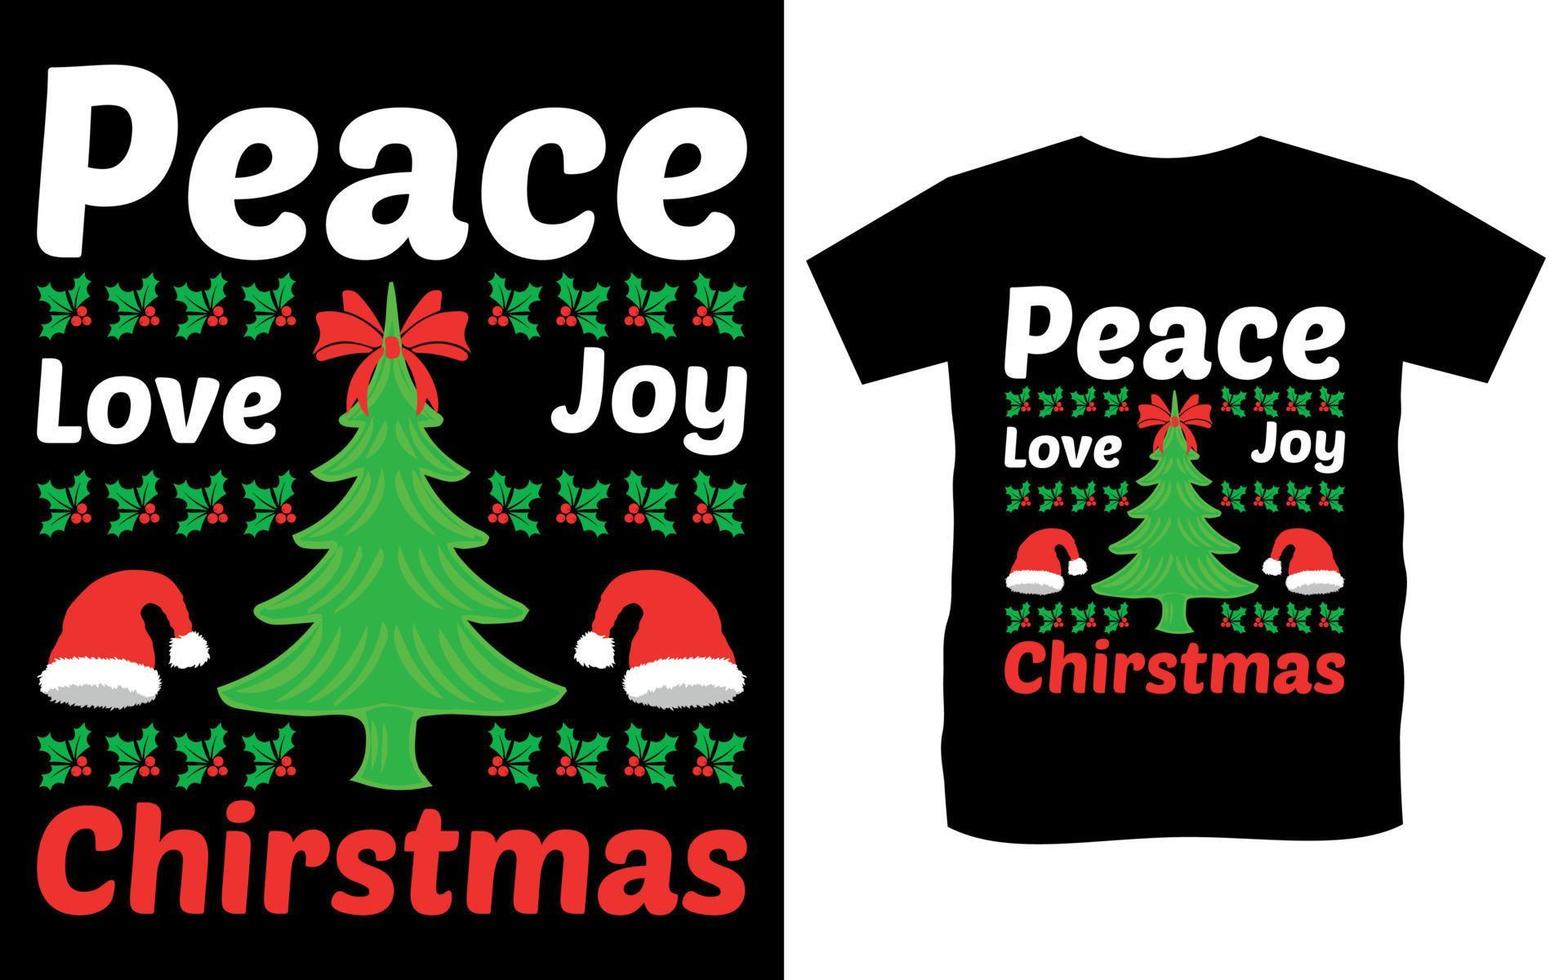 Merry Christmas typography vector T-shirt design.Christmas Trees Shirt, Shirts For Christmas, Cute Merry Christmas Shirts, Christmas Shirts for Women, Christmas Tee, Christmas TShirt